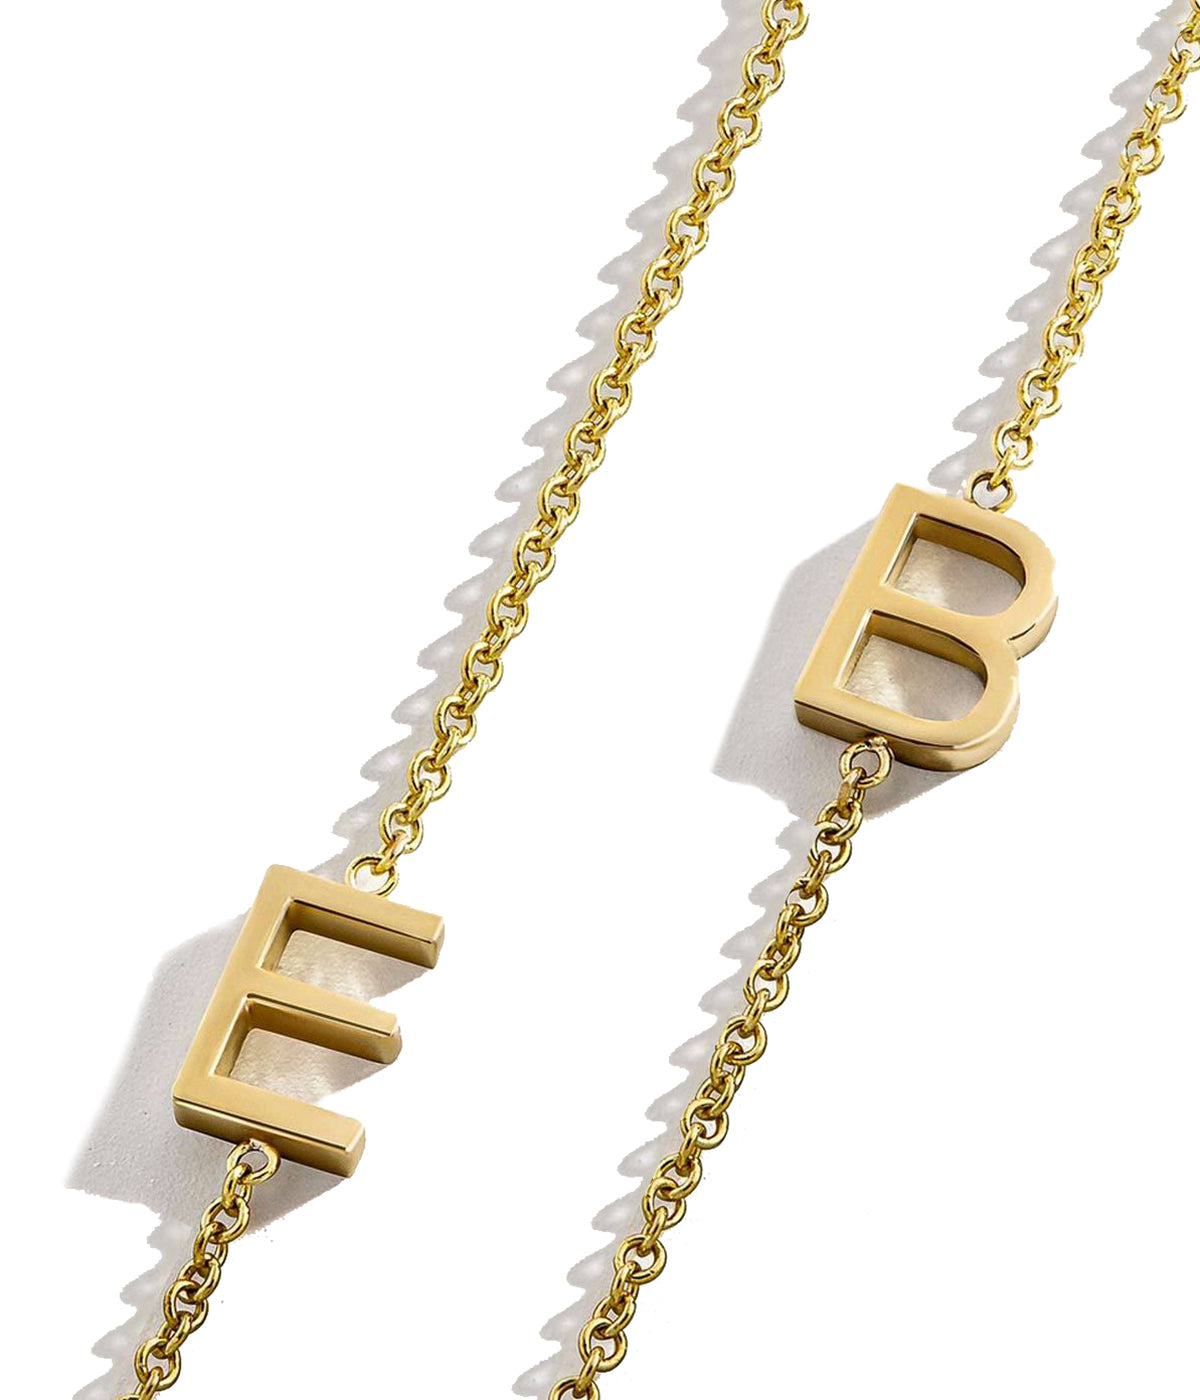 Initial Necklace in Yellow Gold